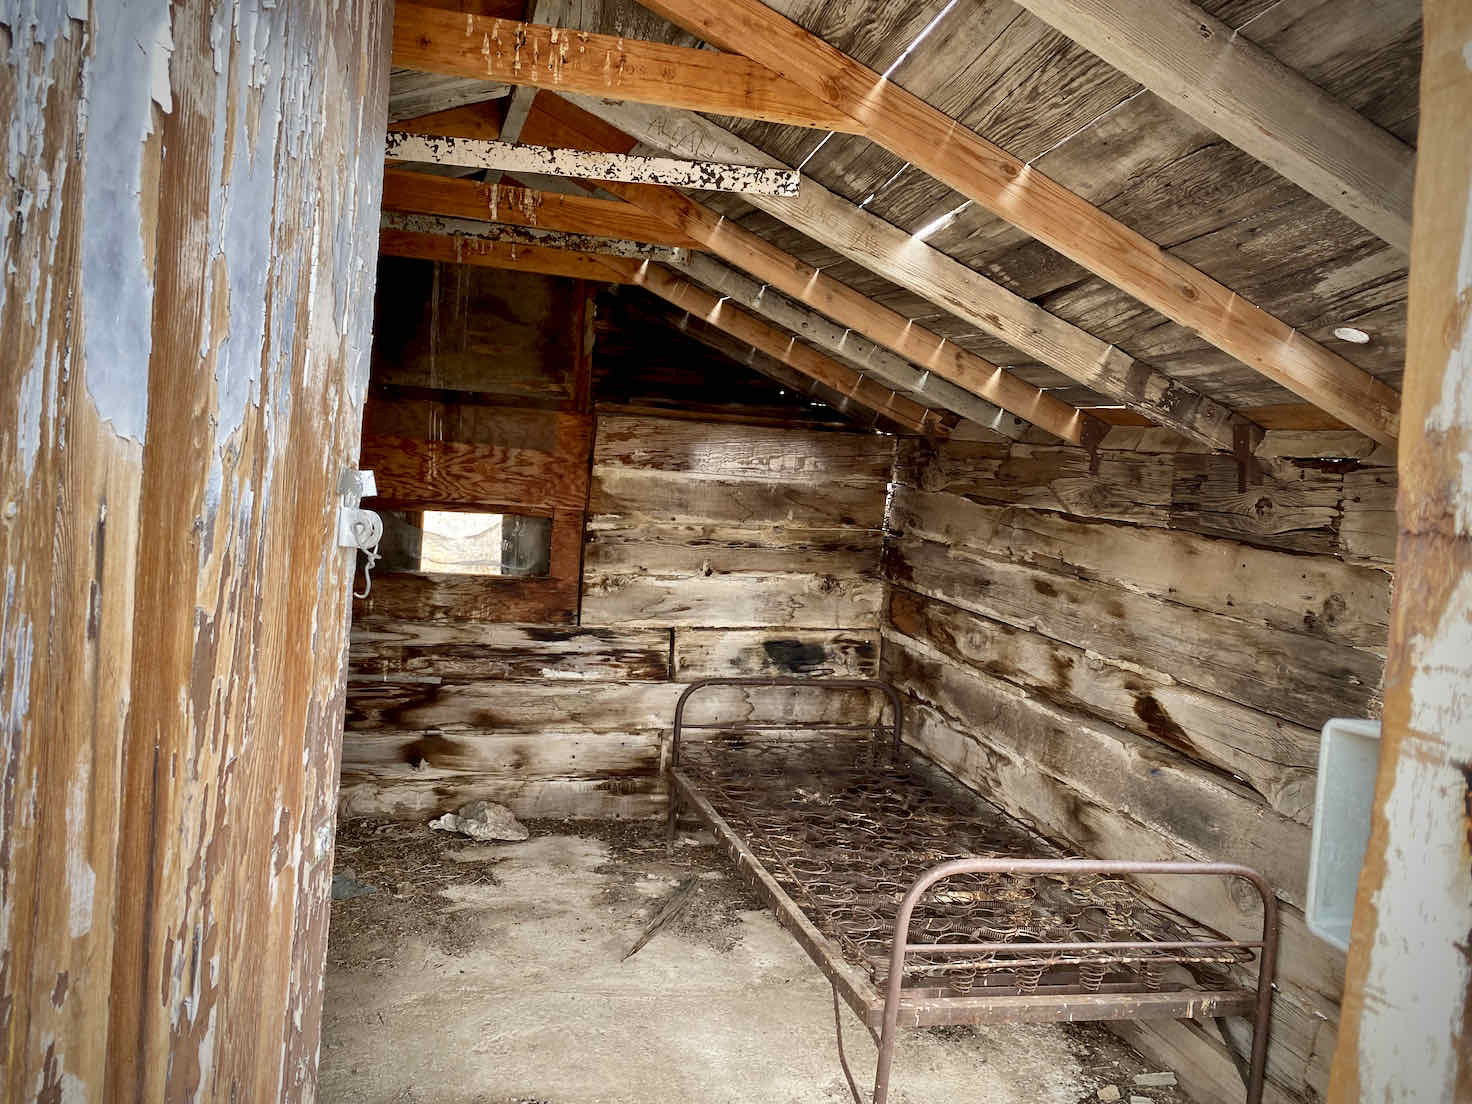 The inside of the old miners cabin along Skidoo road.